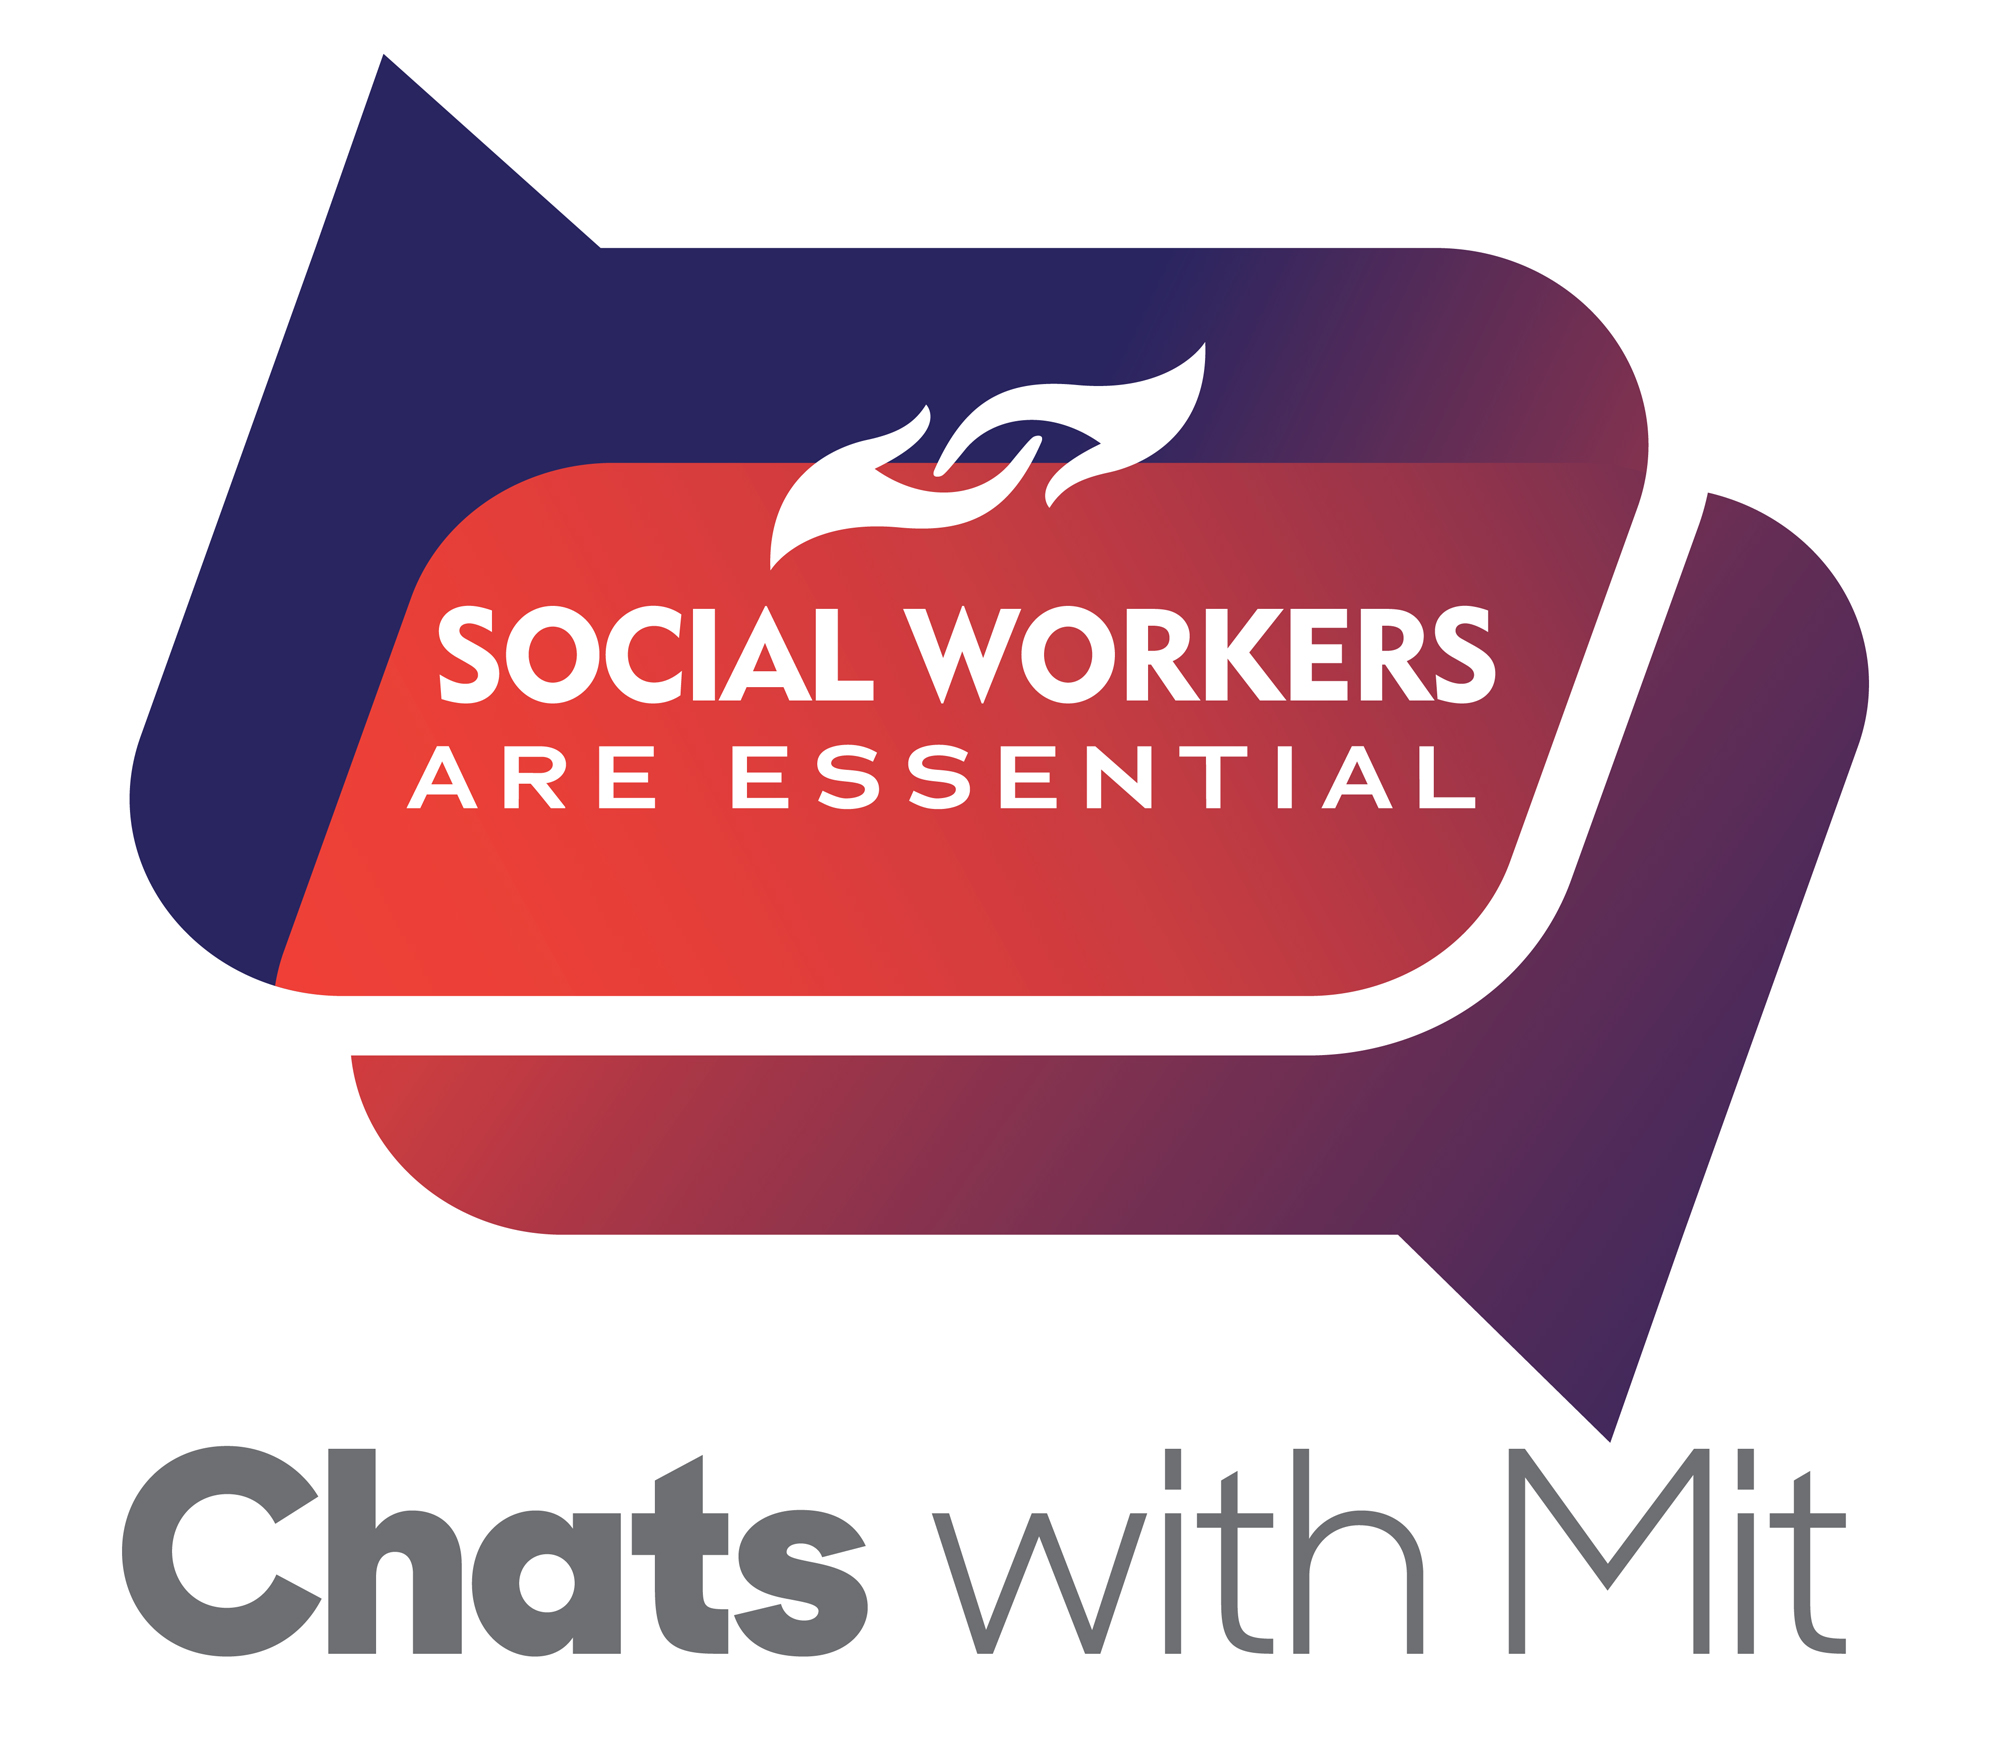 Social workers are essential - Chats with Mit